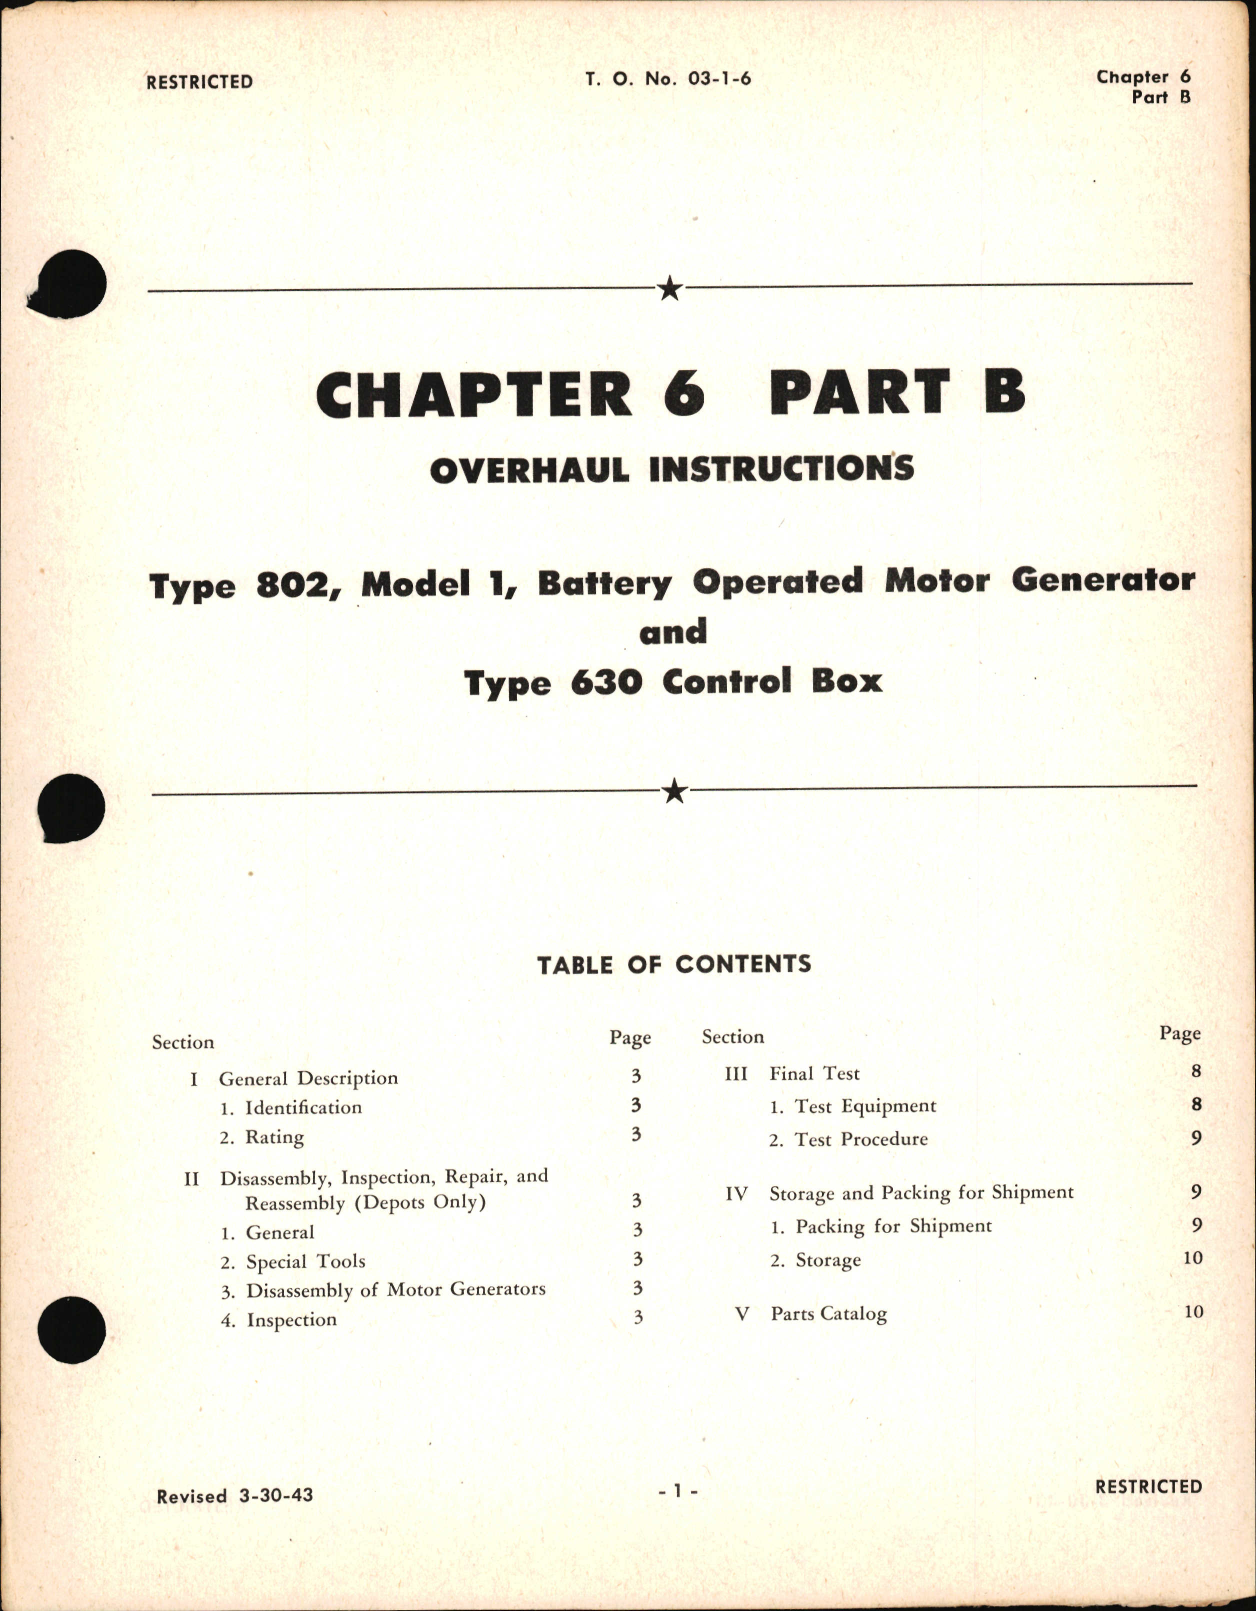 Sample page 1 from AirCorps Library document: Overhaul Instructions for Battery Operated Motor Generator and Control Box